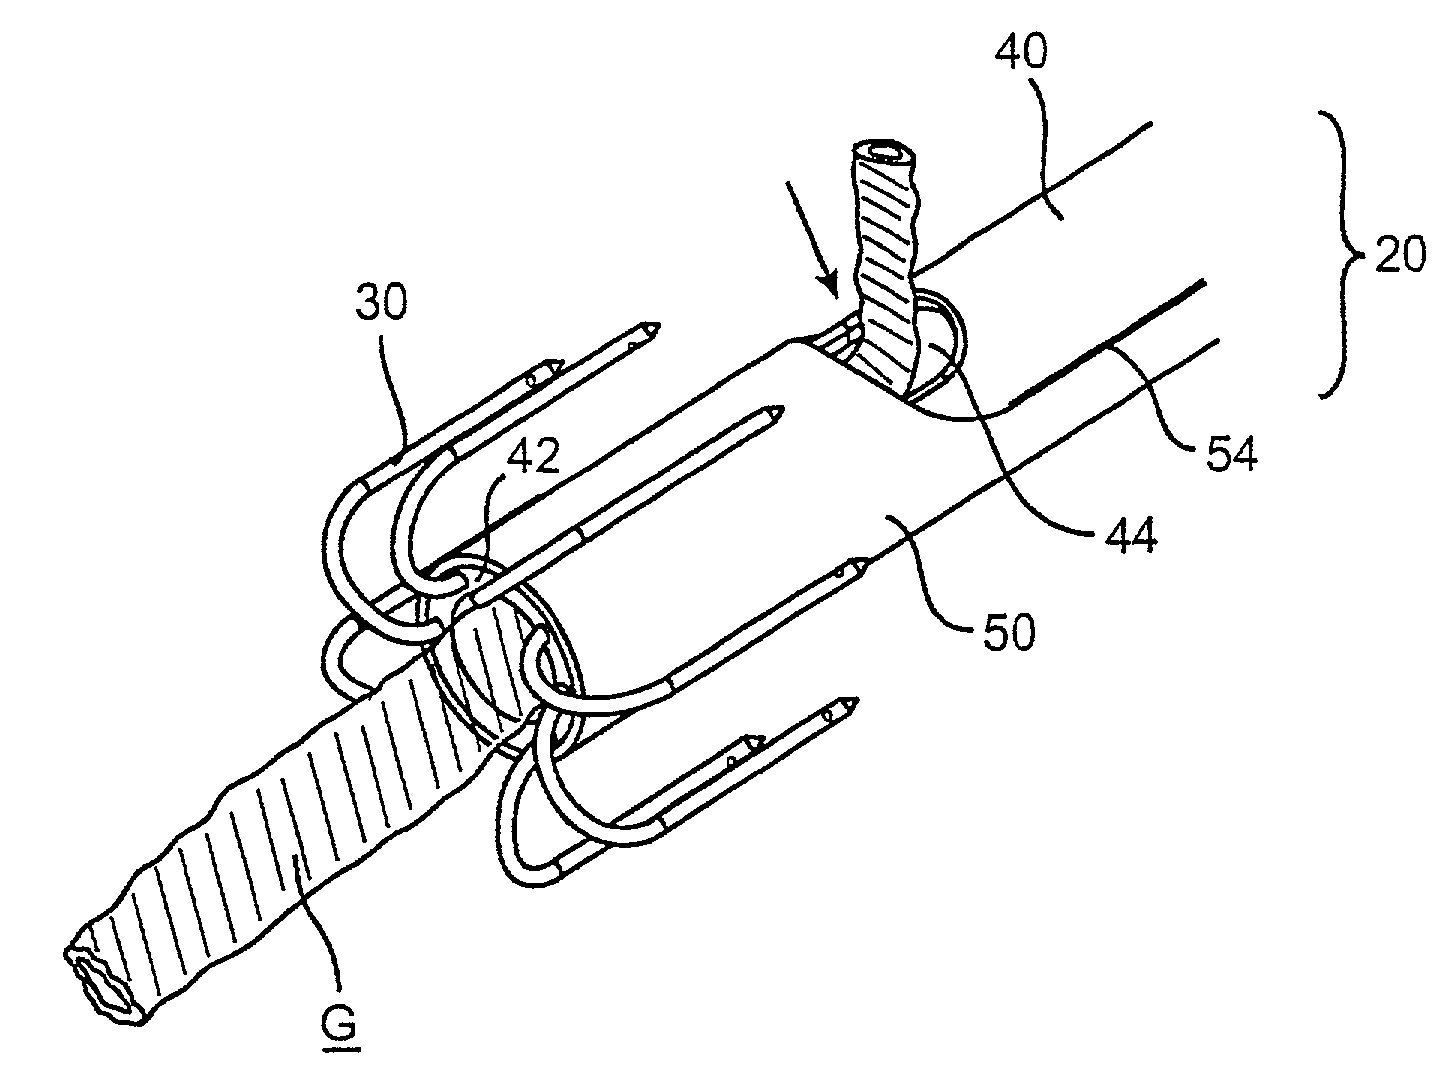 Device and method for performing end-to-side anastomosis